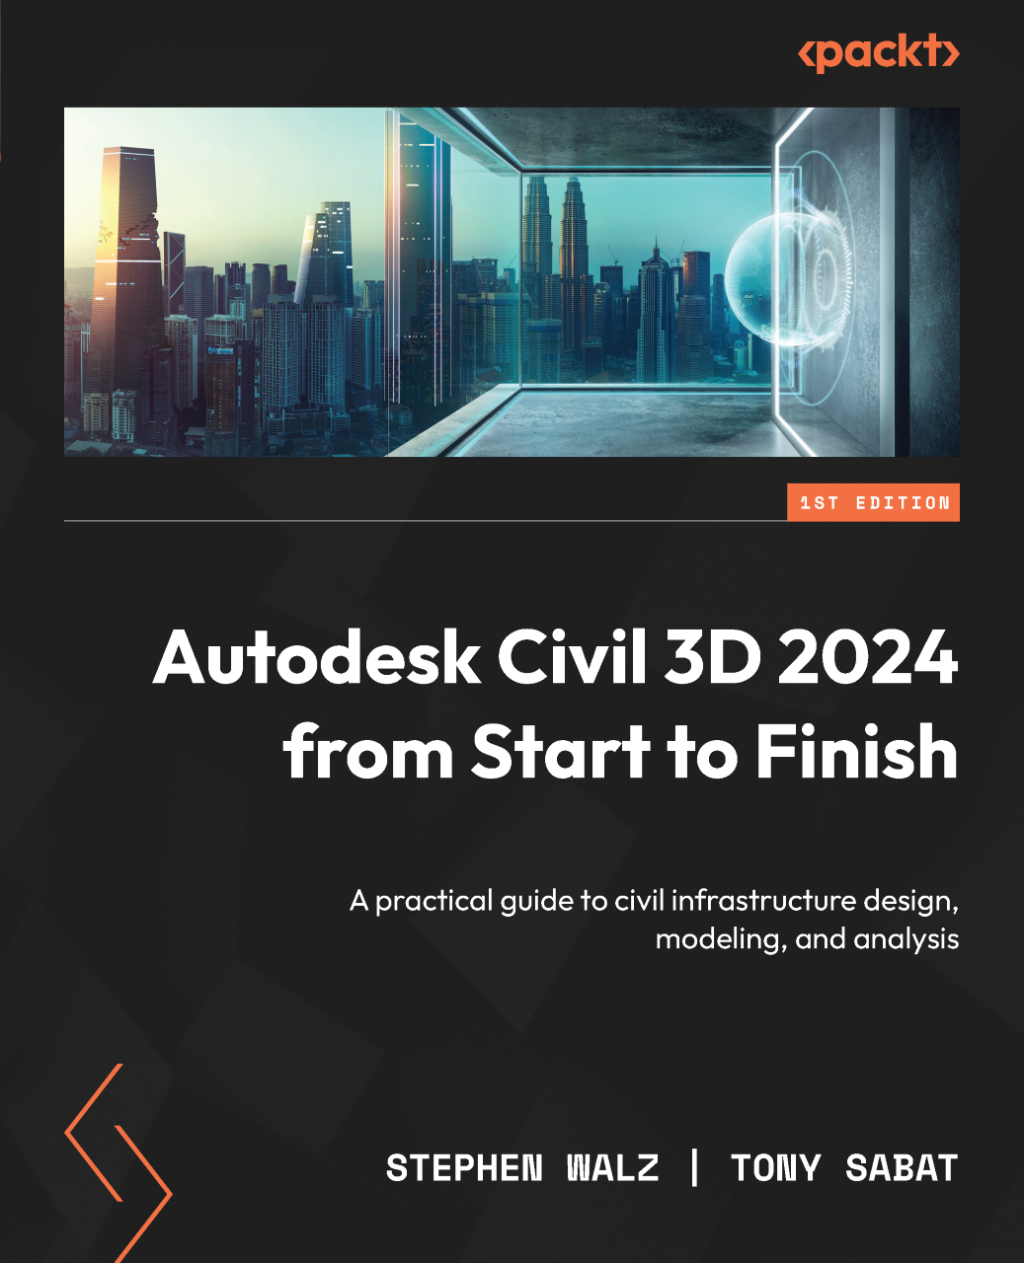 New Book – Autodesk Civil 3D 2024 from Start to Finish